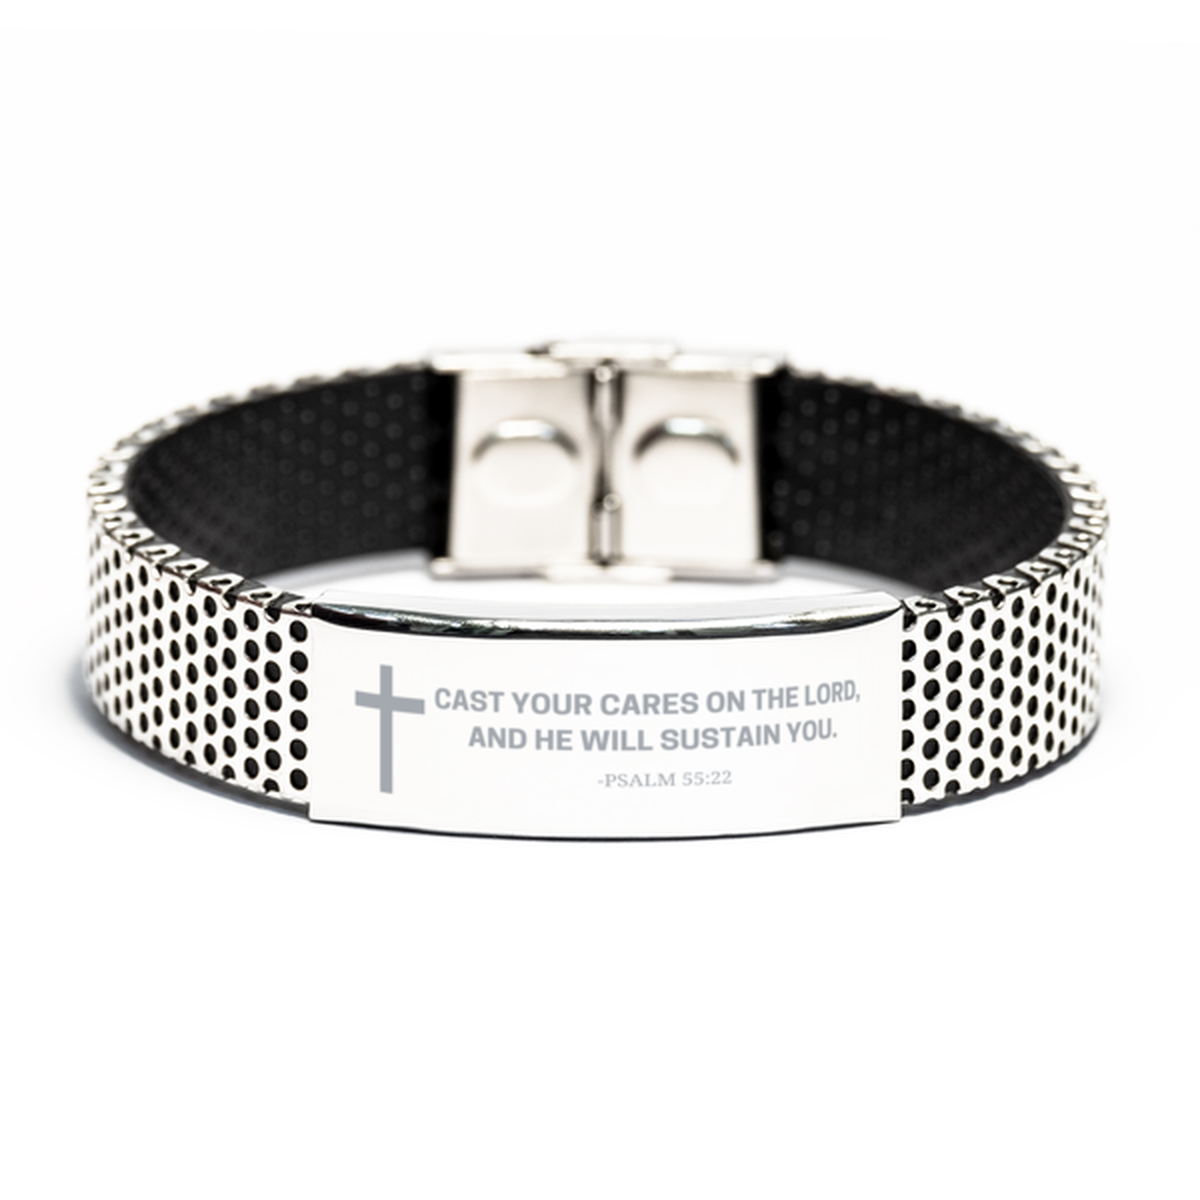 Baptism Gifts For Teenage Boys Girls, Christian Bible Verse Stainless Steel Bracelet, Cast your cares on the Lord, Catholic Confirmation Gifts for Son, Godson, Grandson, Nephew